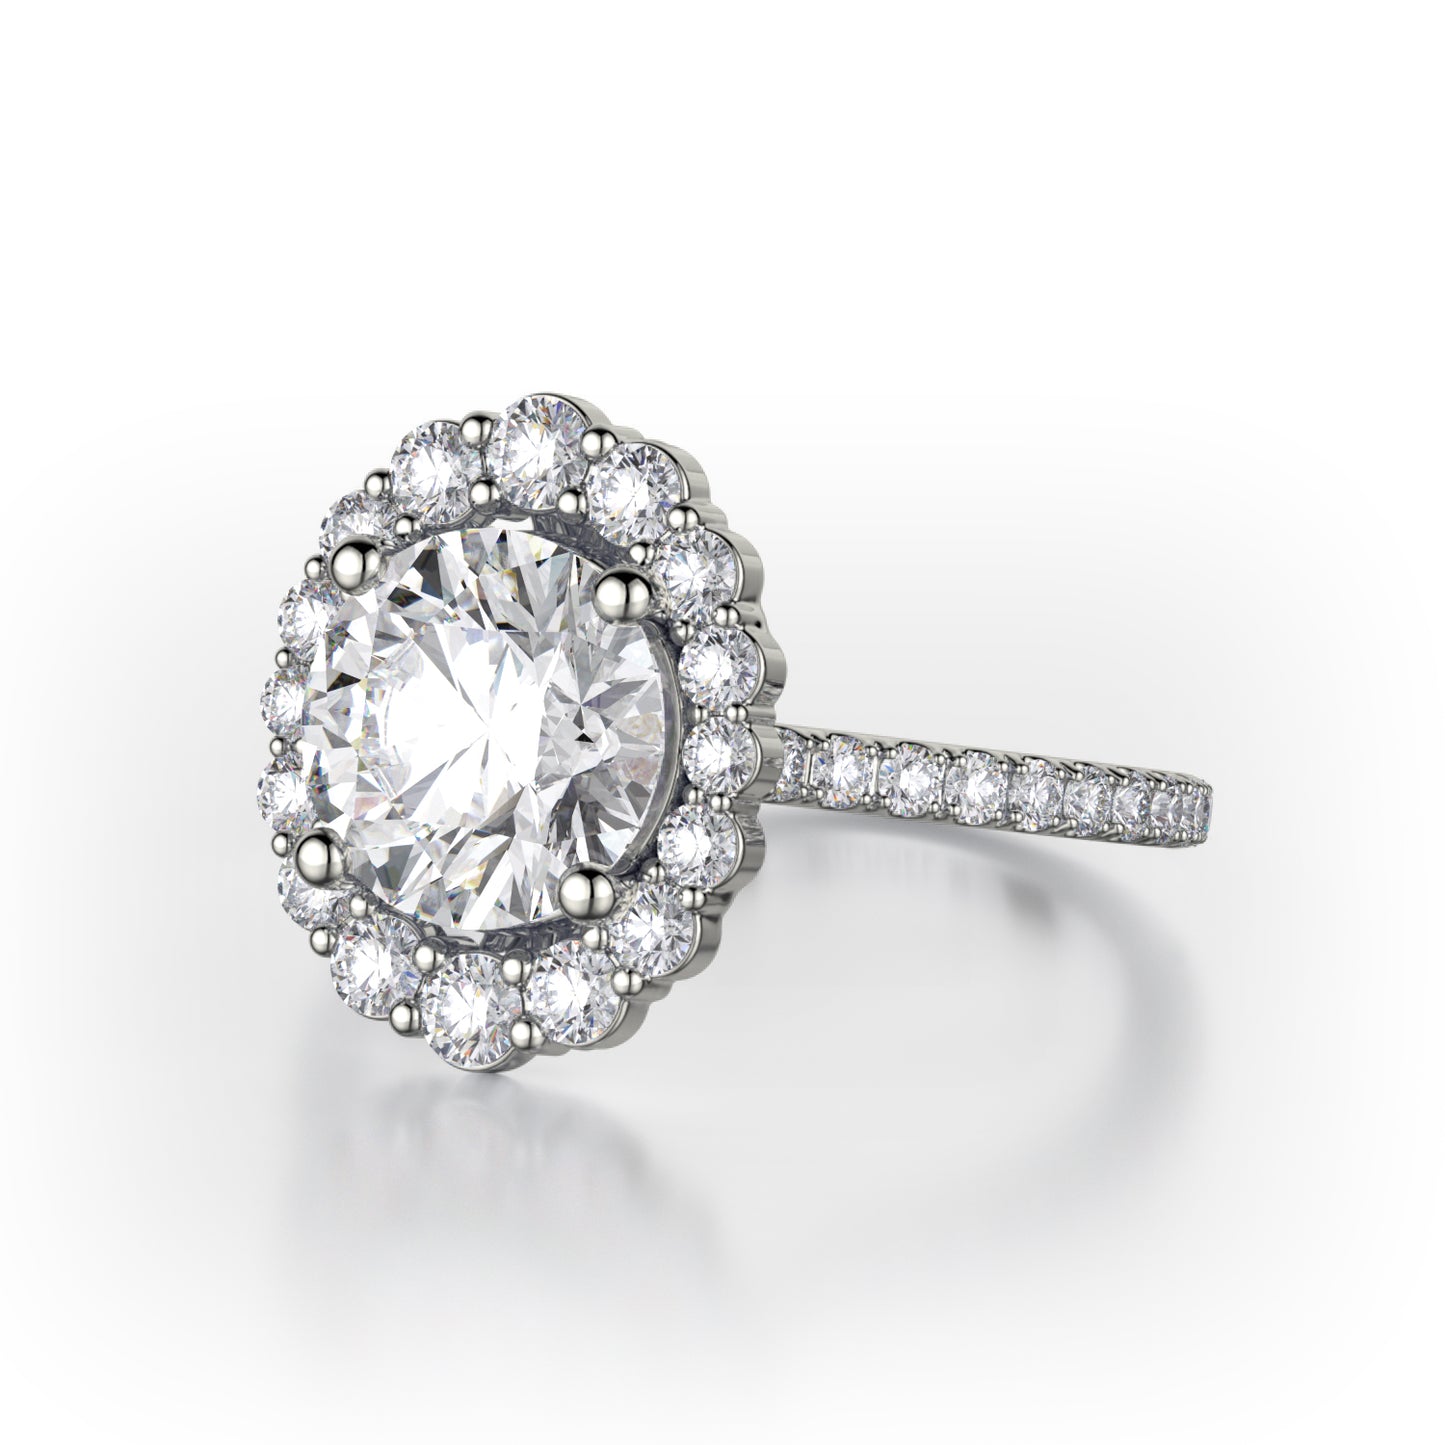 Michael M Defined Engagement Ring